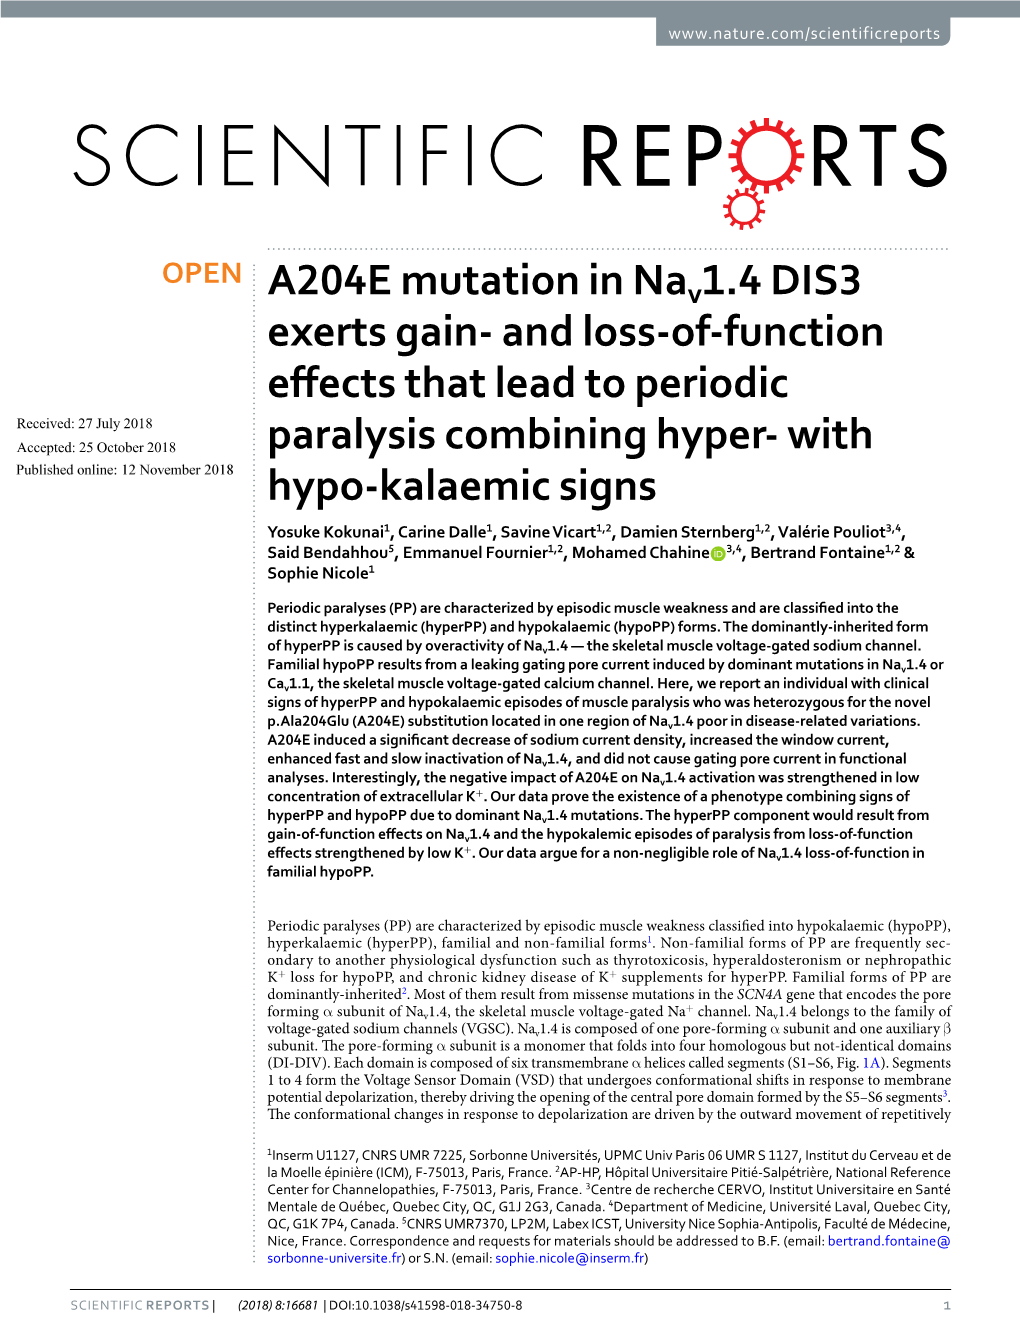 A204E Mutation in Nav1.4 DIS3 Exerts Gain- and Loss-Of-Function Effects That Lead to Periodic Paralysis Combining Hyper